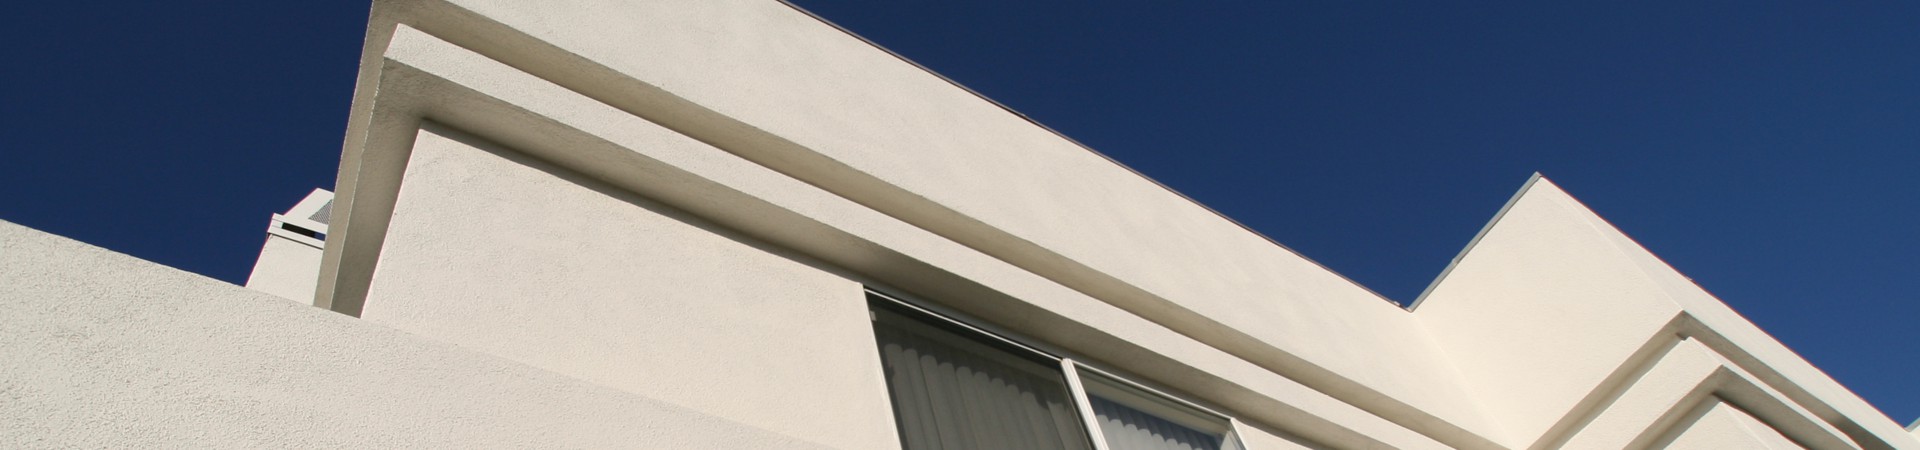 Older stucco can be restored and strengthened by the installation of CHIC Advanced Coating.